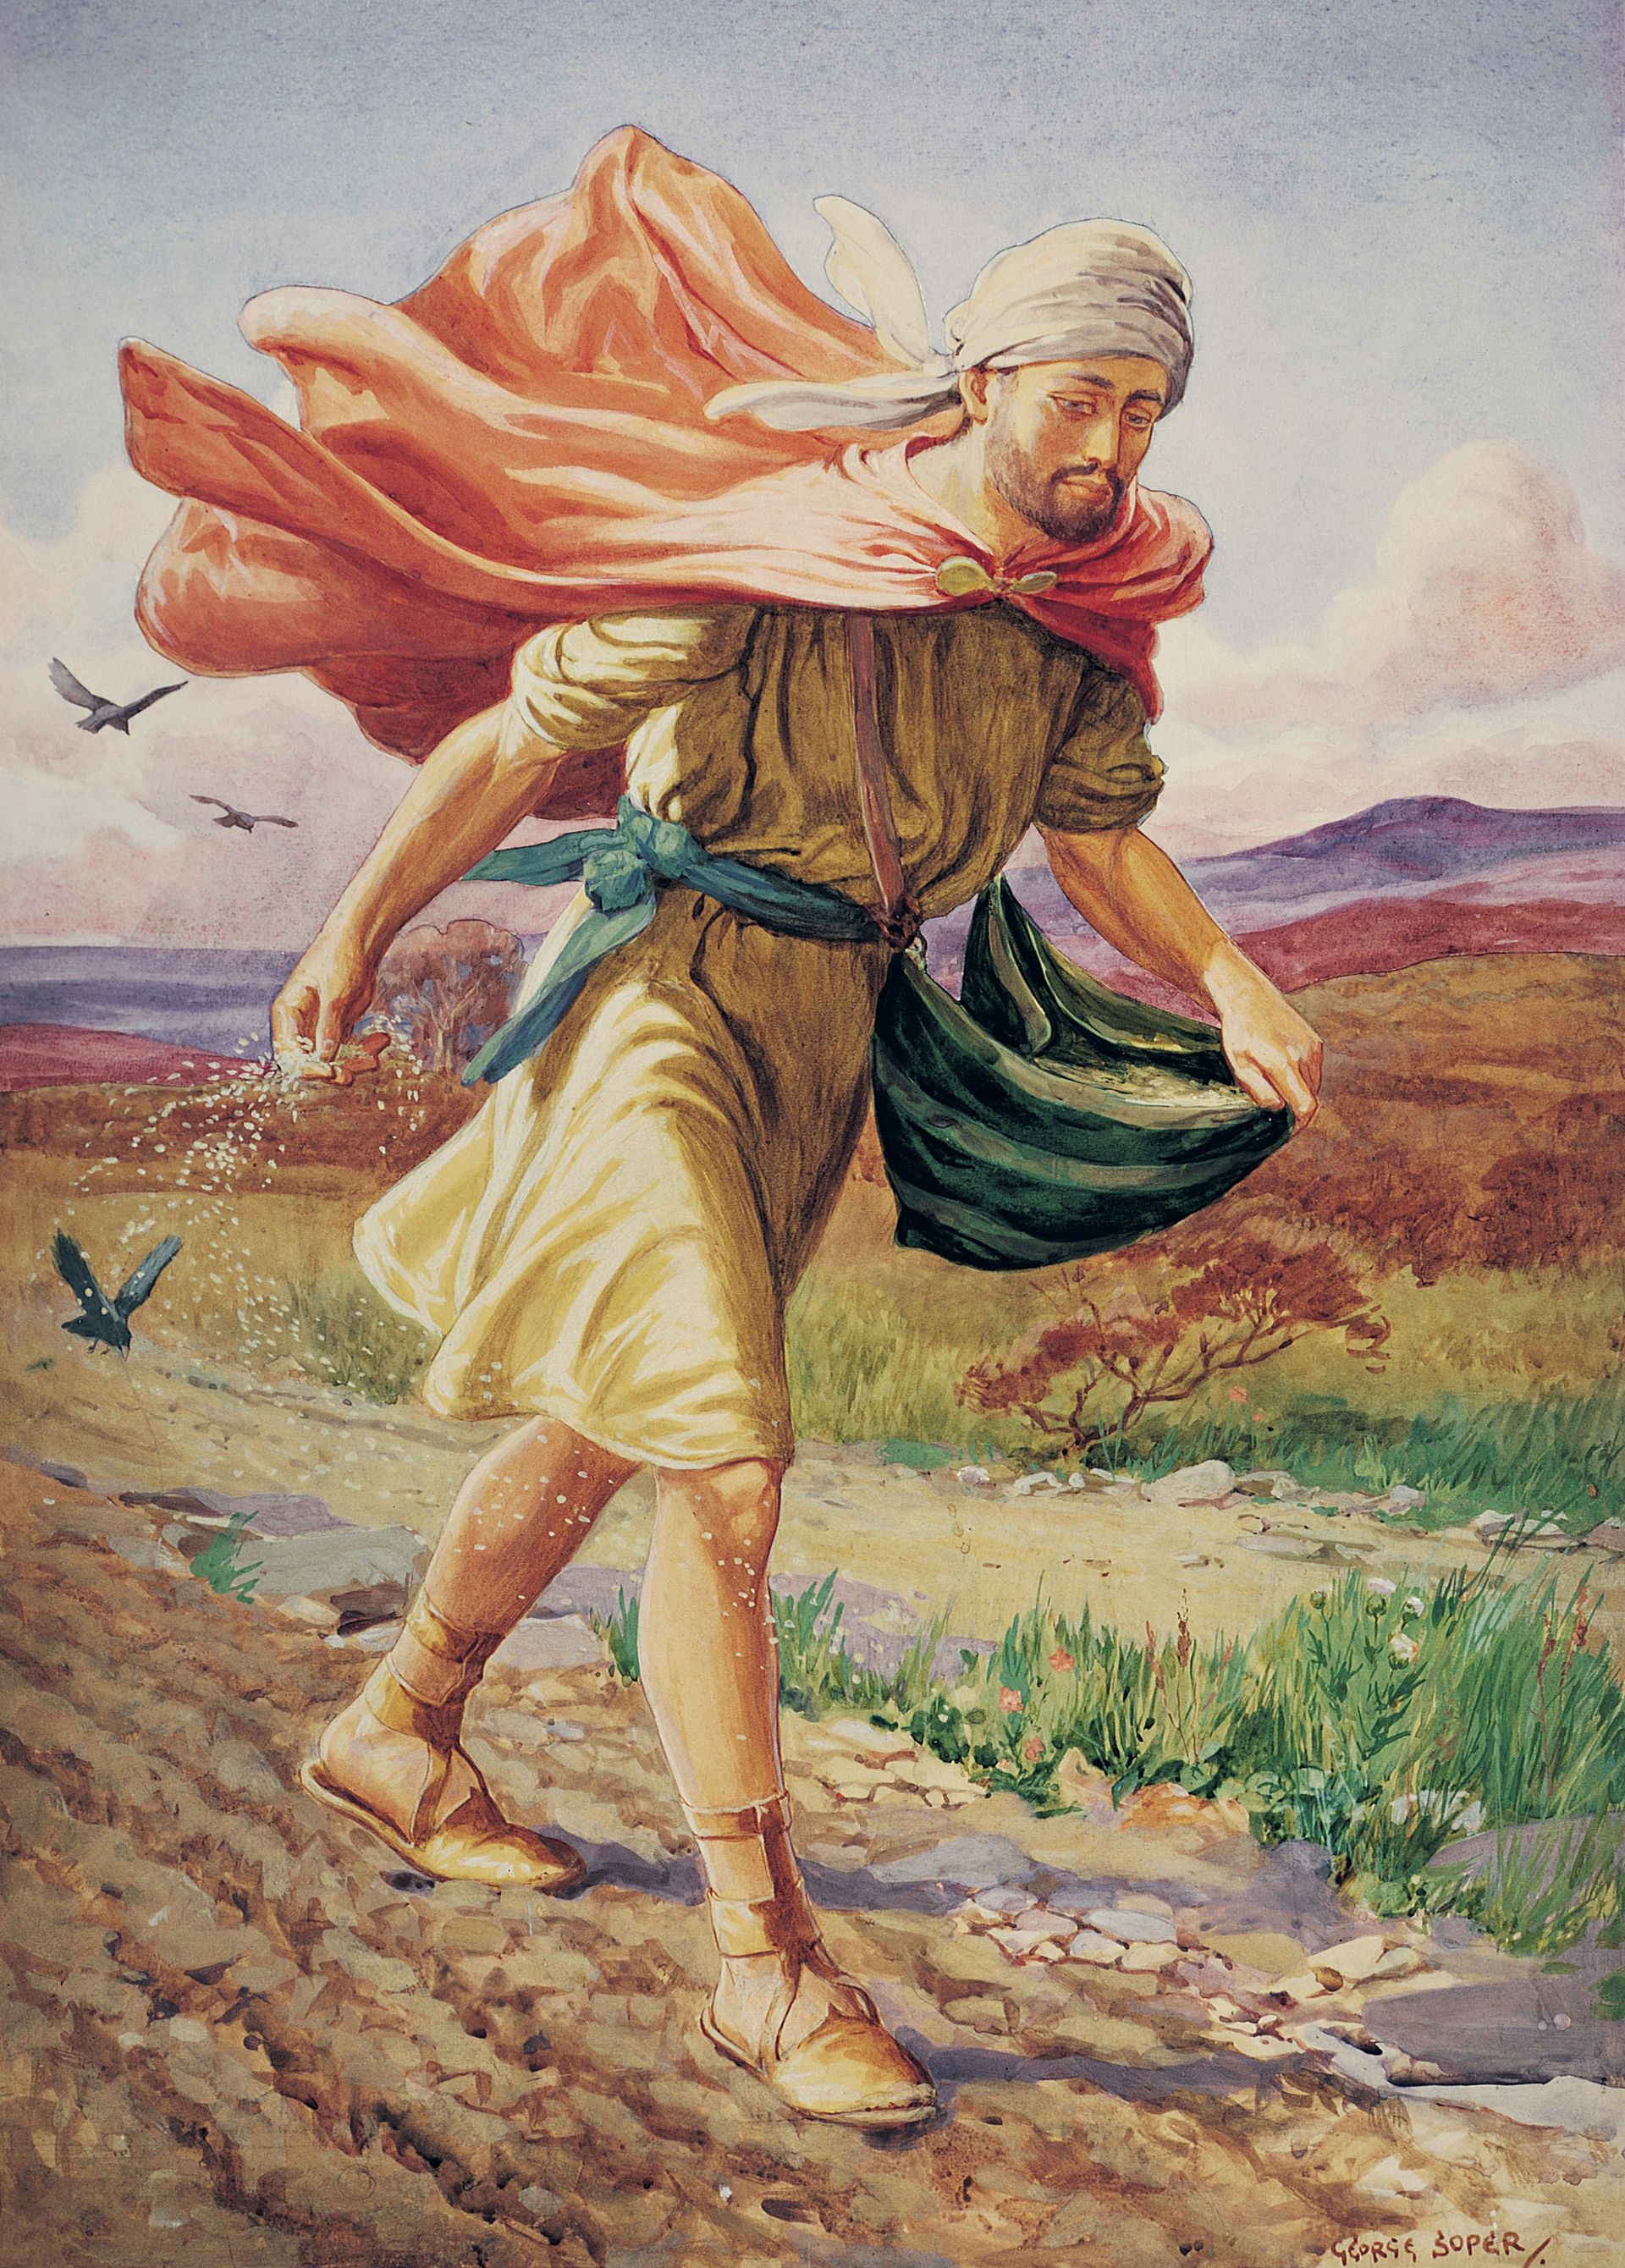 The Sower, by George Soper